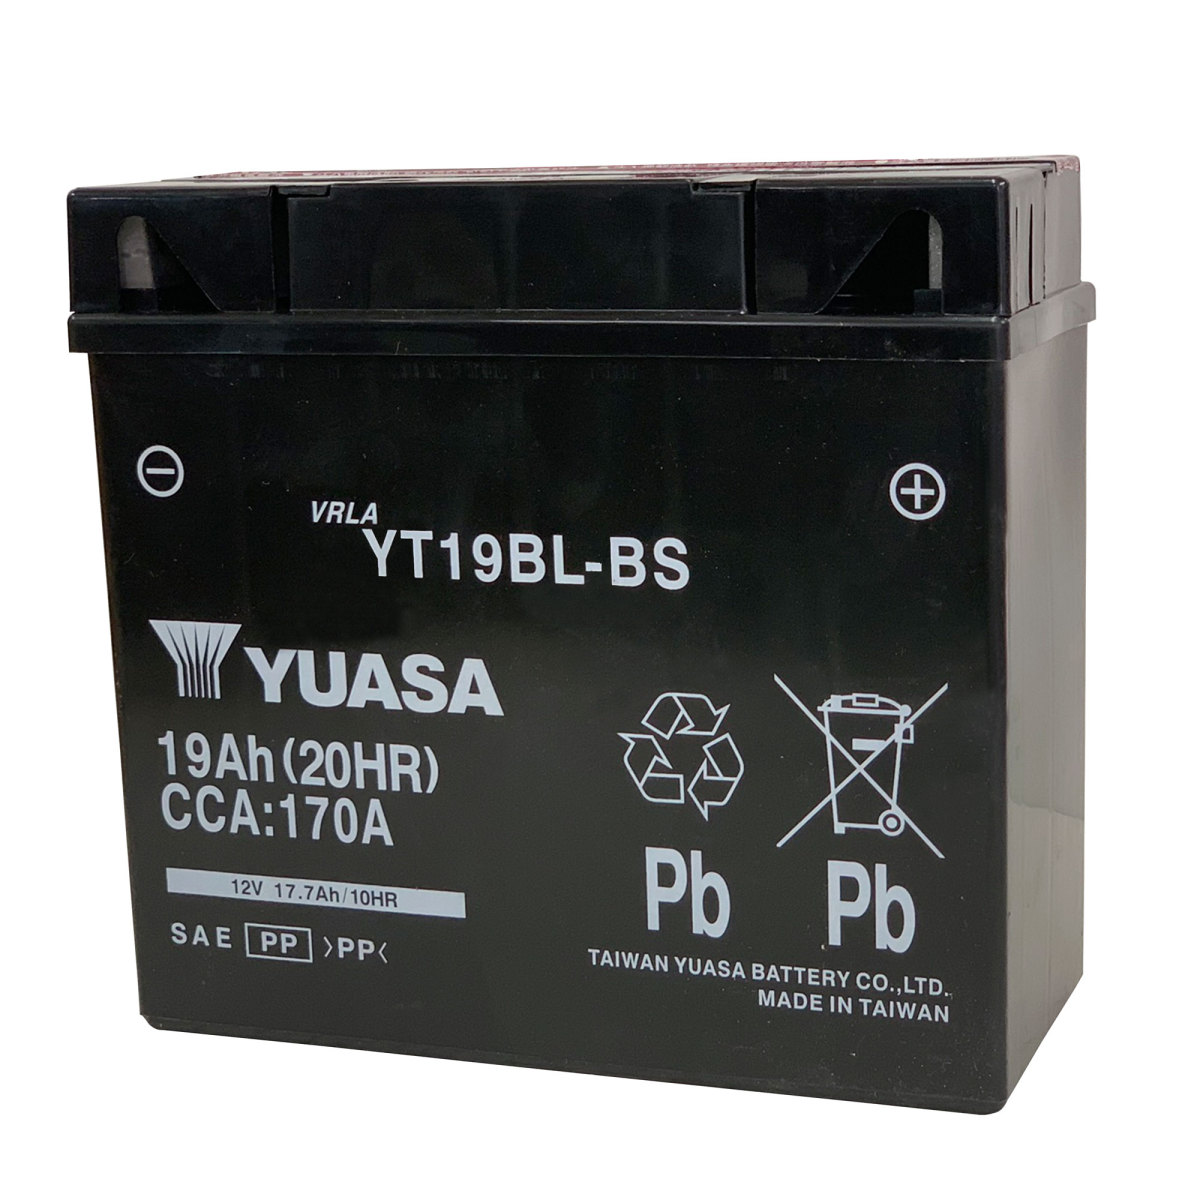 [ digital tester set ] Taiwan YUASA Yuasa YT19BL-BS interchangeable BMW 51913 EXIDE 61212346800 the first period charge settled immediately use possibility 